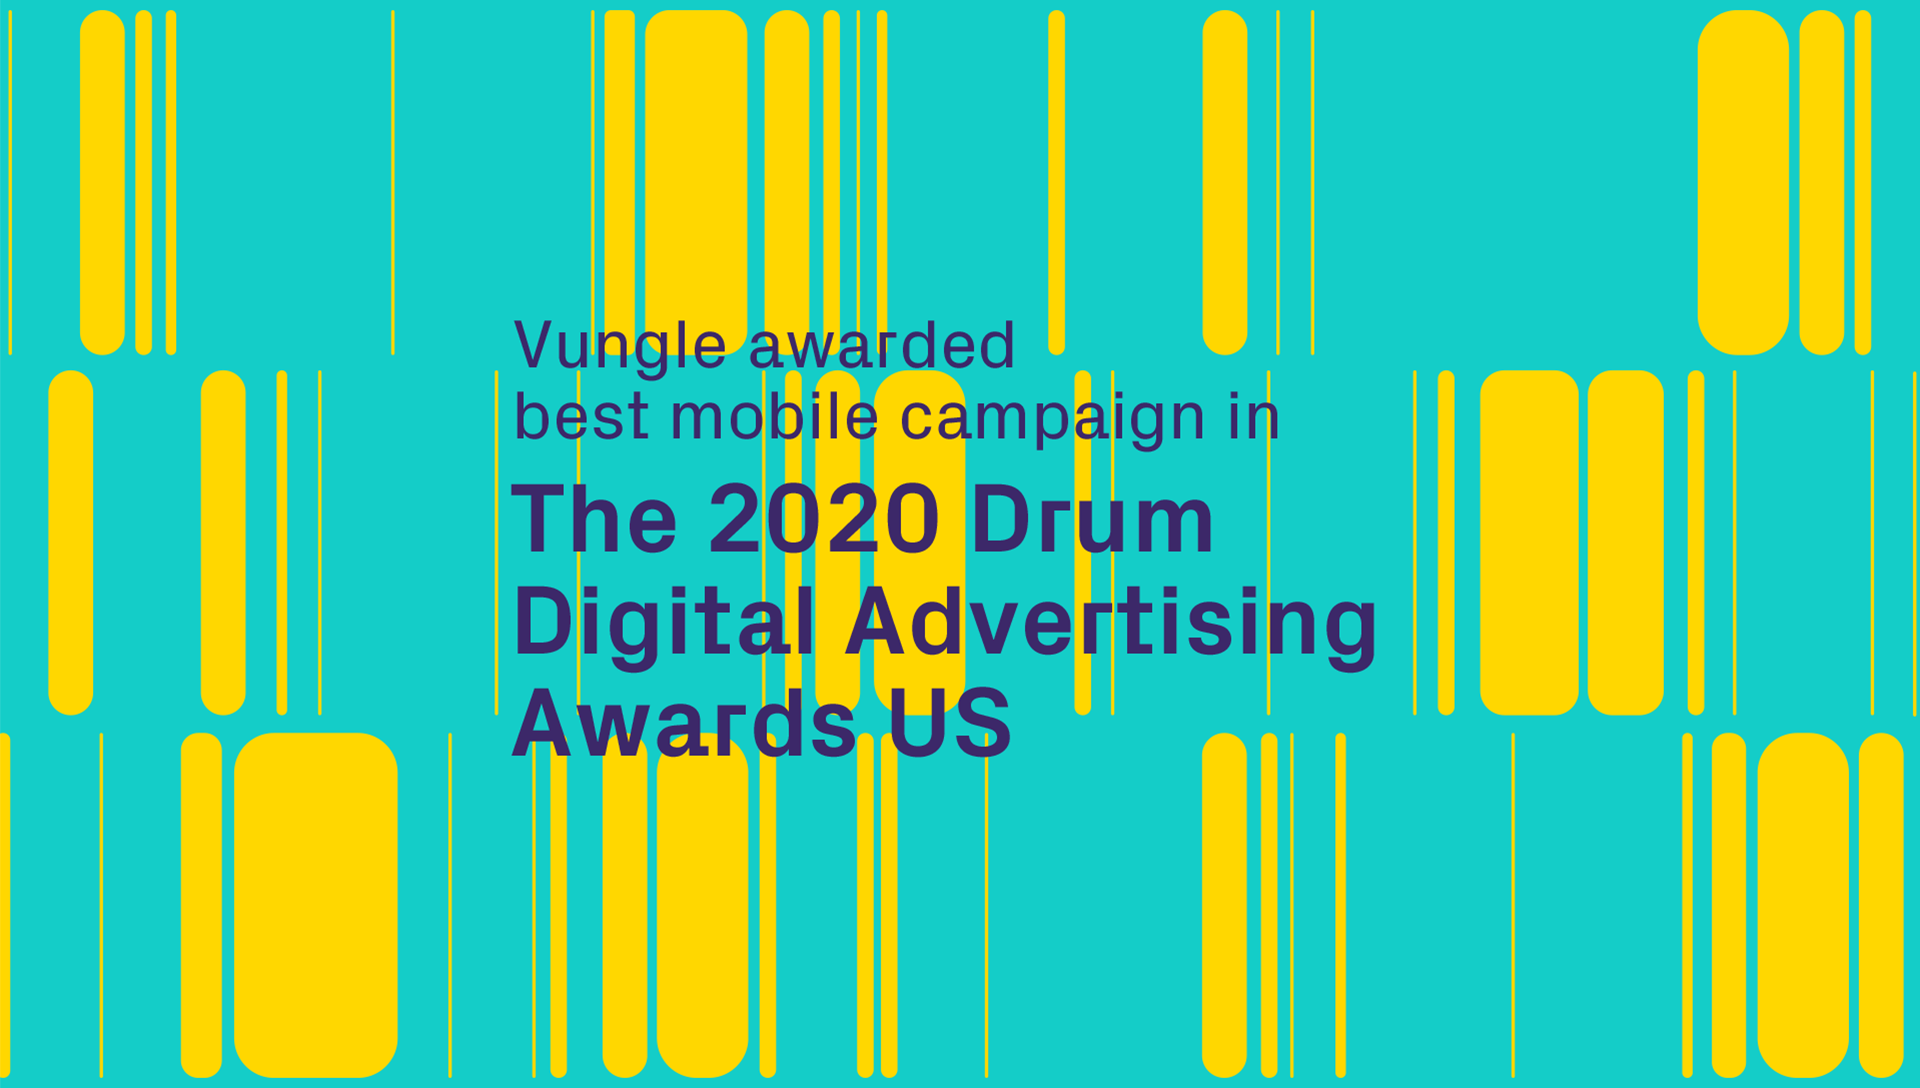 The Drum’s Digital Advertising Awards US Winners Revealed: Vungle Receives Accolades